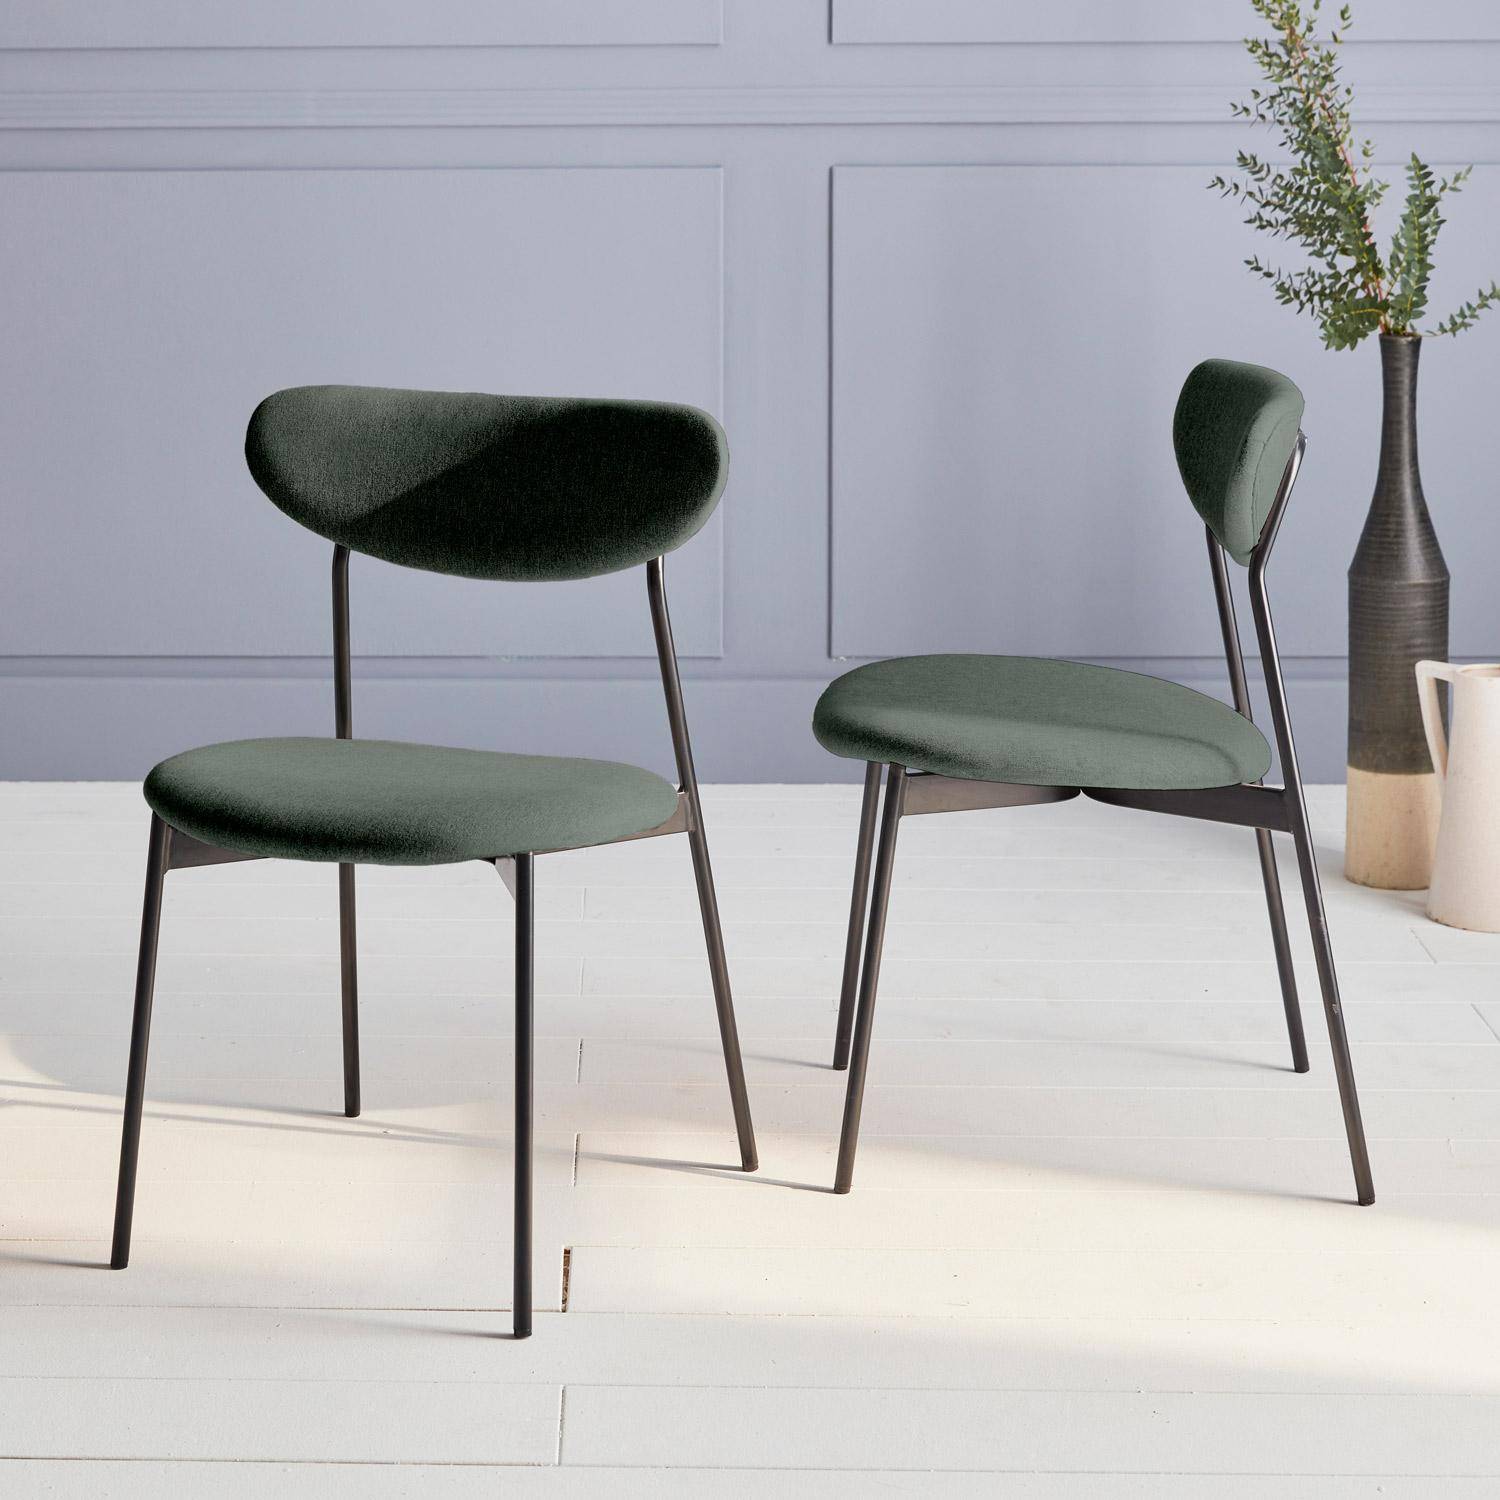 Set of 2 retro style dining chairs with steel legs - Arty - Green Photo2